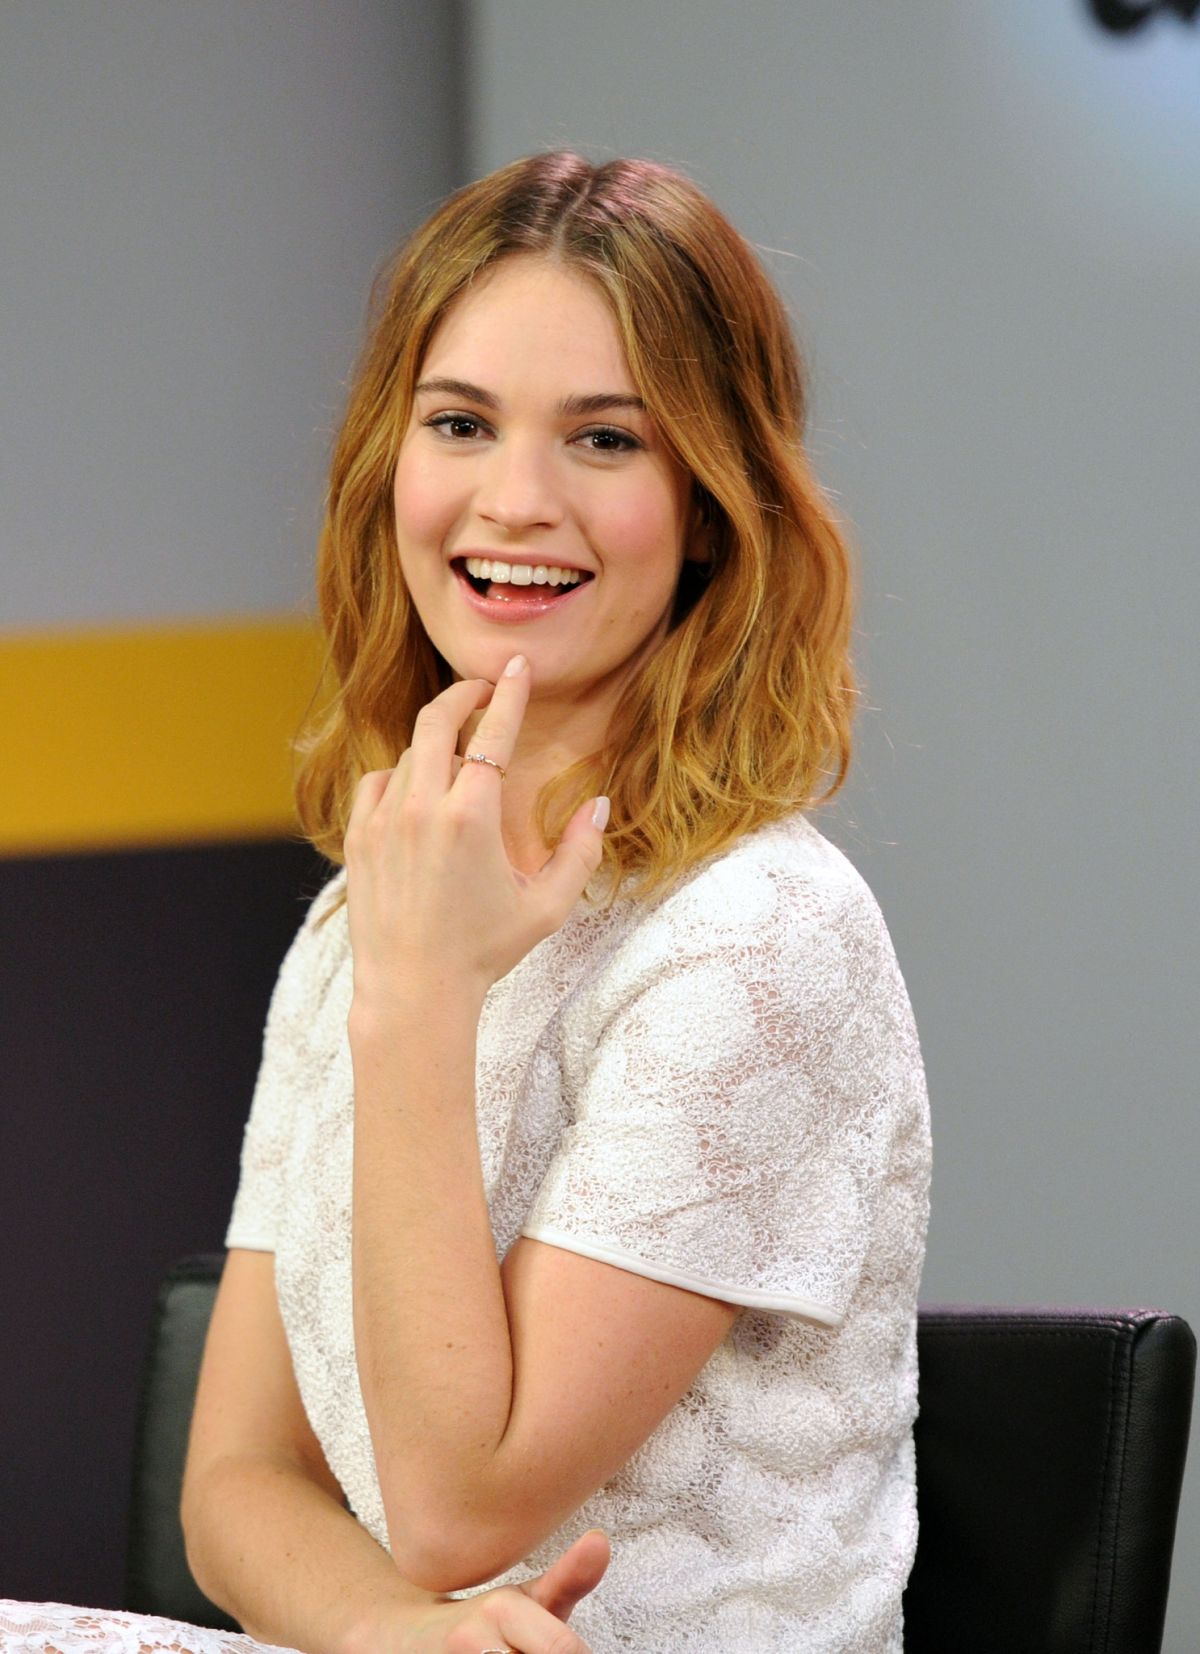 lily-james-on-the-set-of-imdb-interview-with-jerry-o-connell-01-27-2016_8.